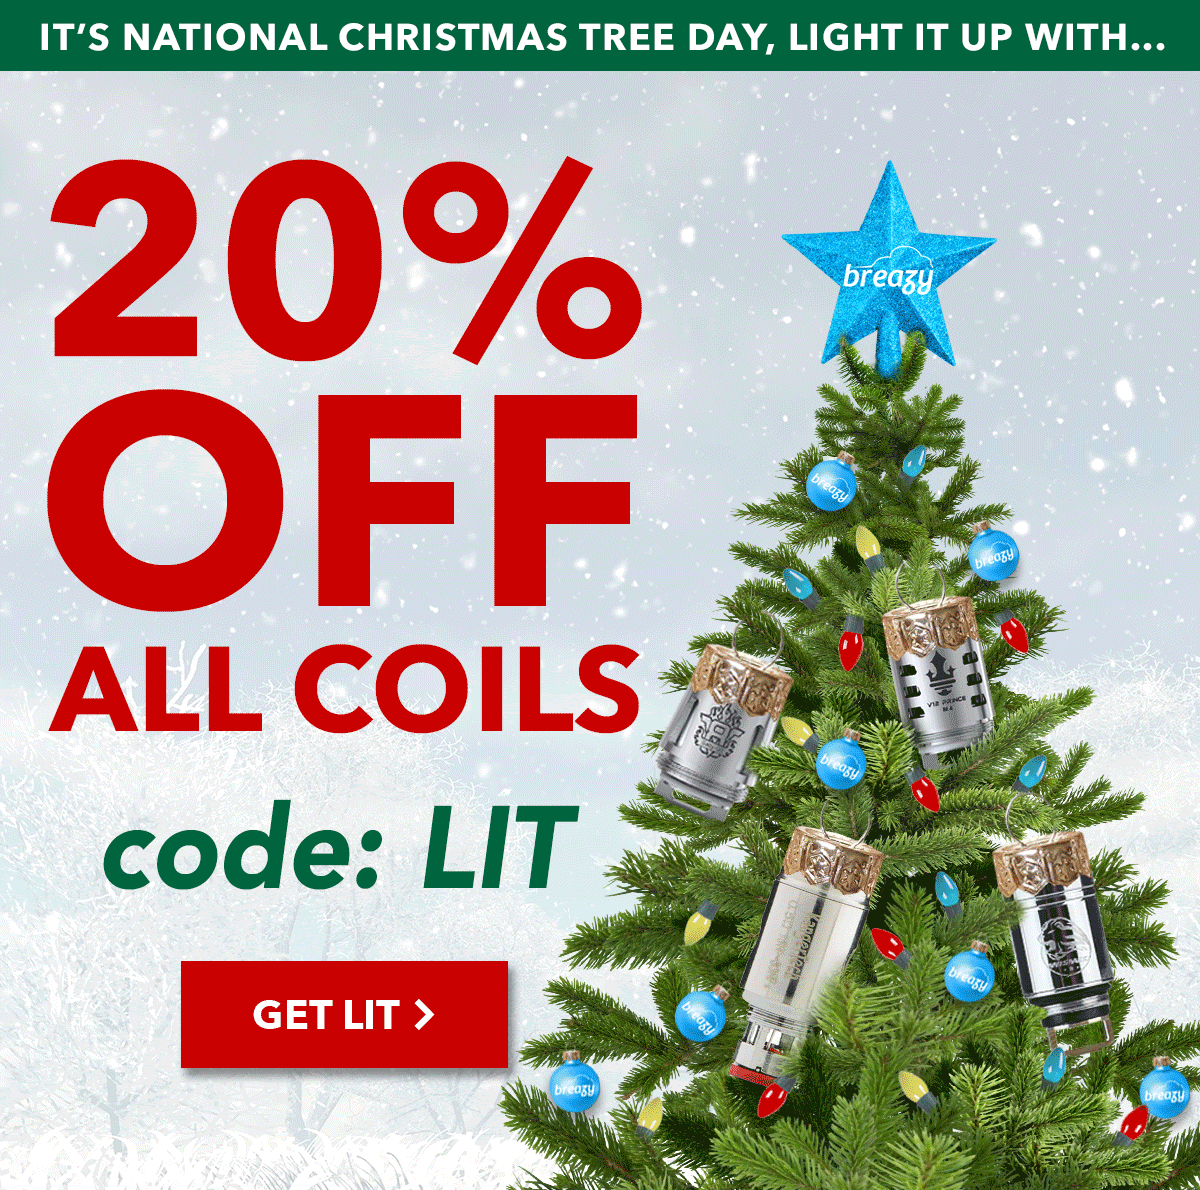 20% Off All Coils Code: LIT